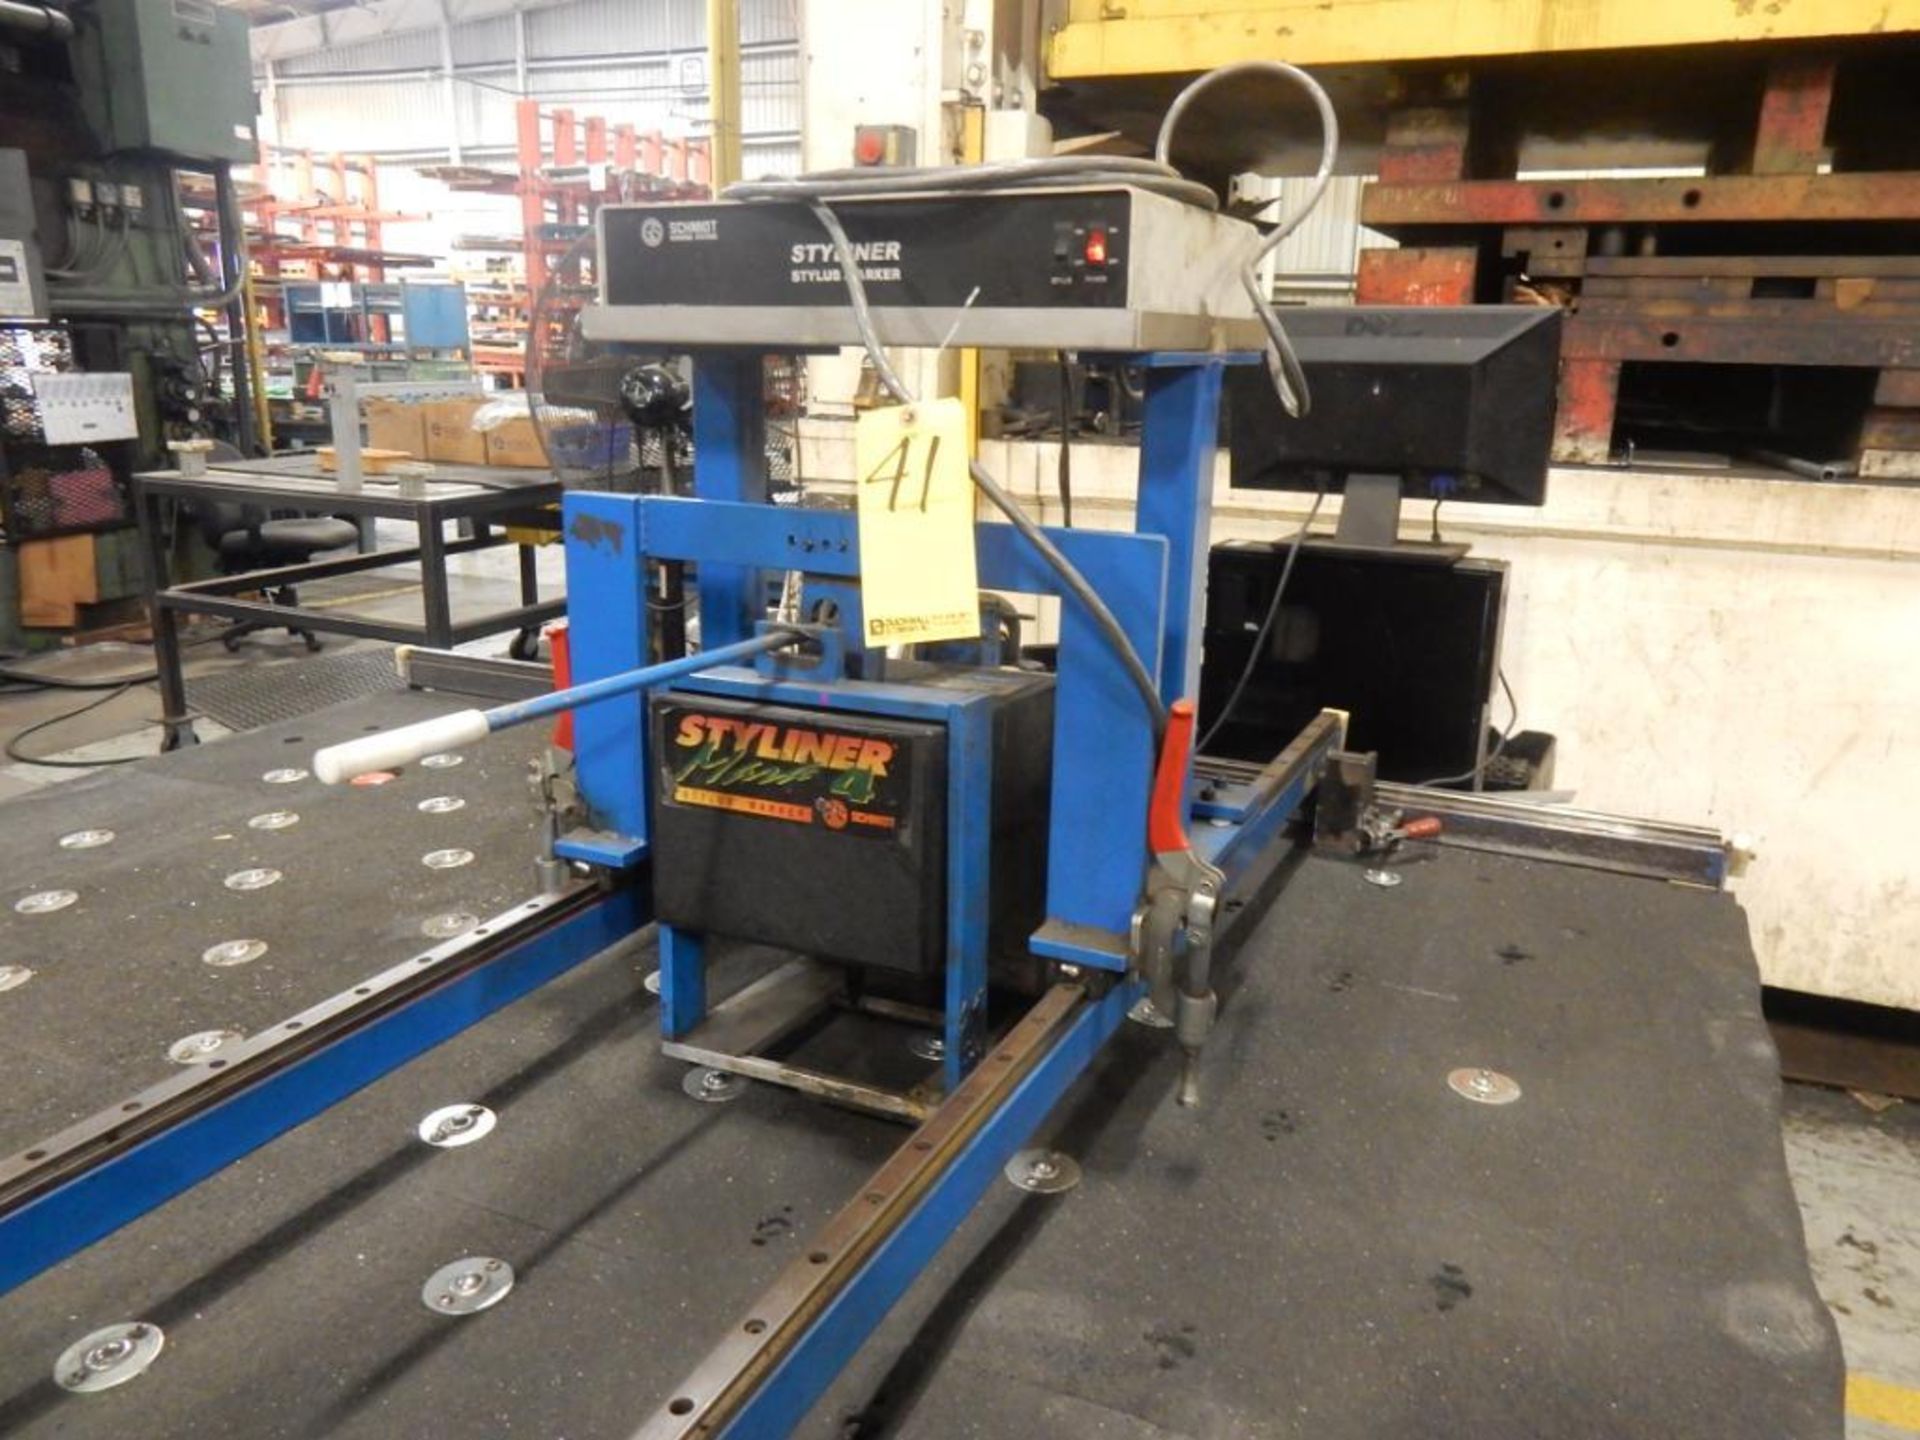 SCHMIDT MARKING SYSTEM, M# SYLINER MARK 4, S/N 17418, 7' X 7' TRANSFER BALL TABLE, PC CONTROLS, (2) - Image 2 of 3